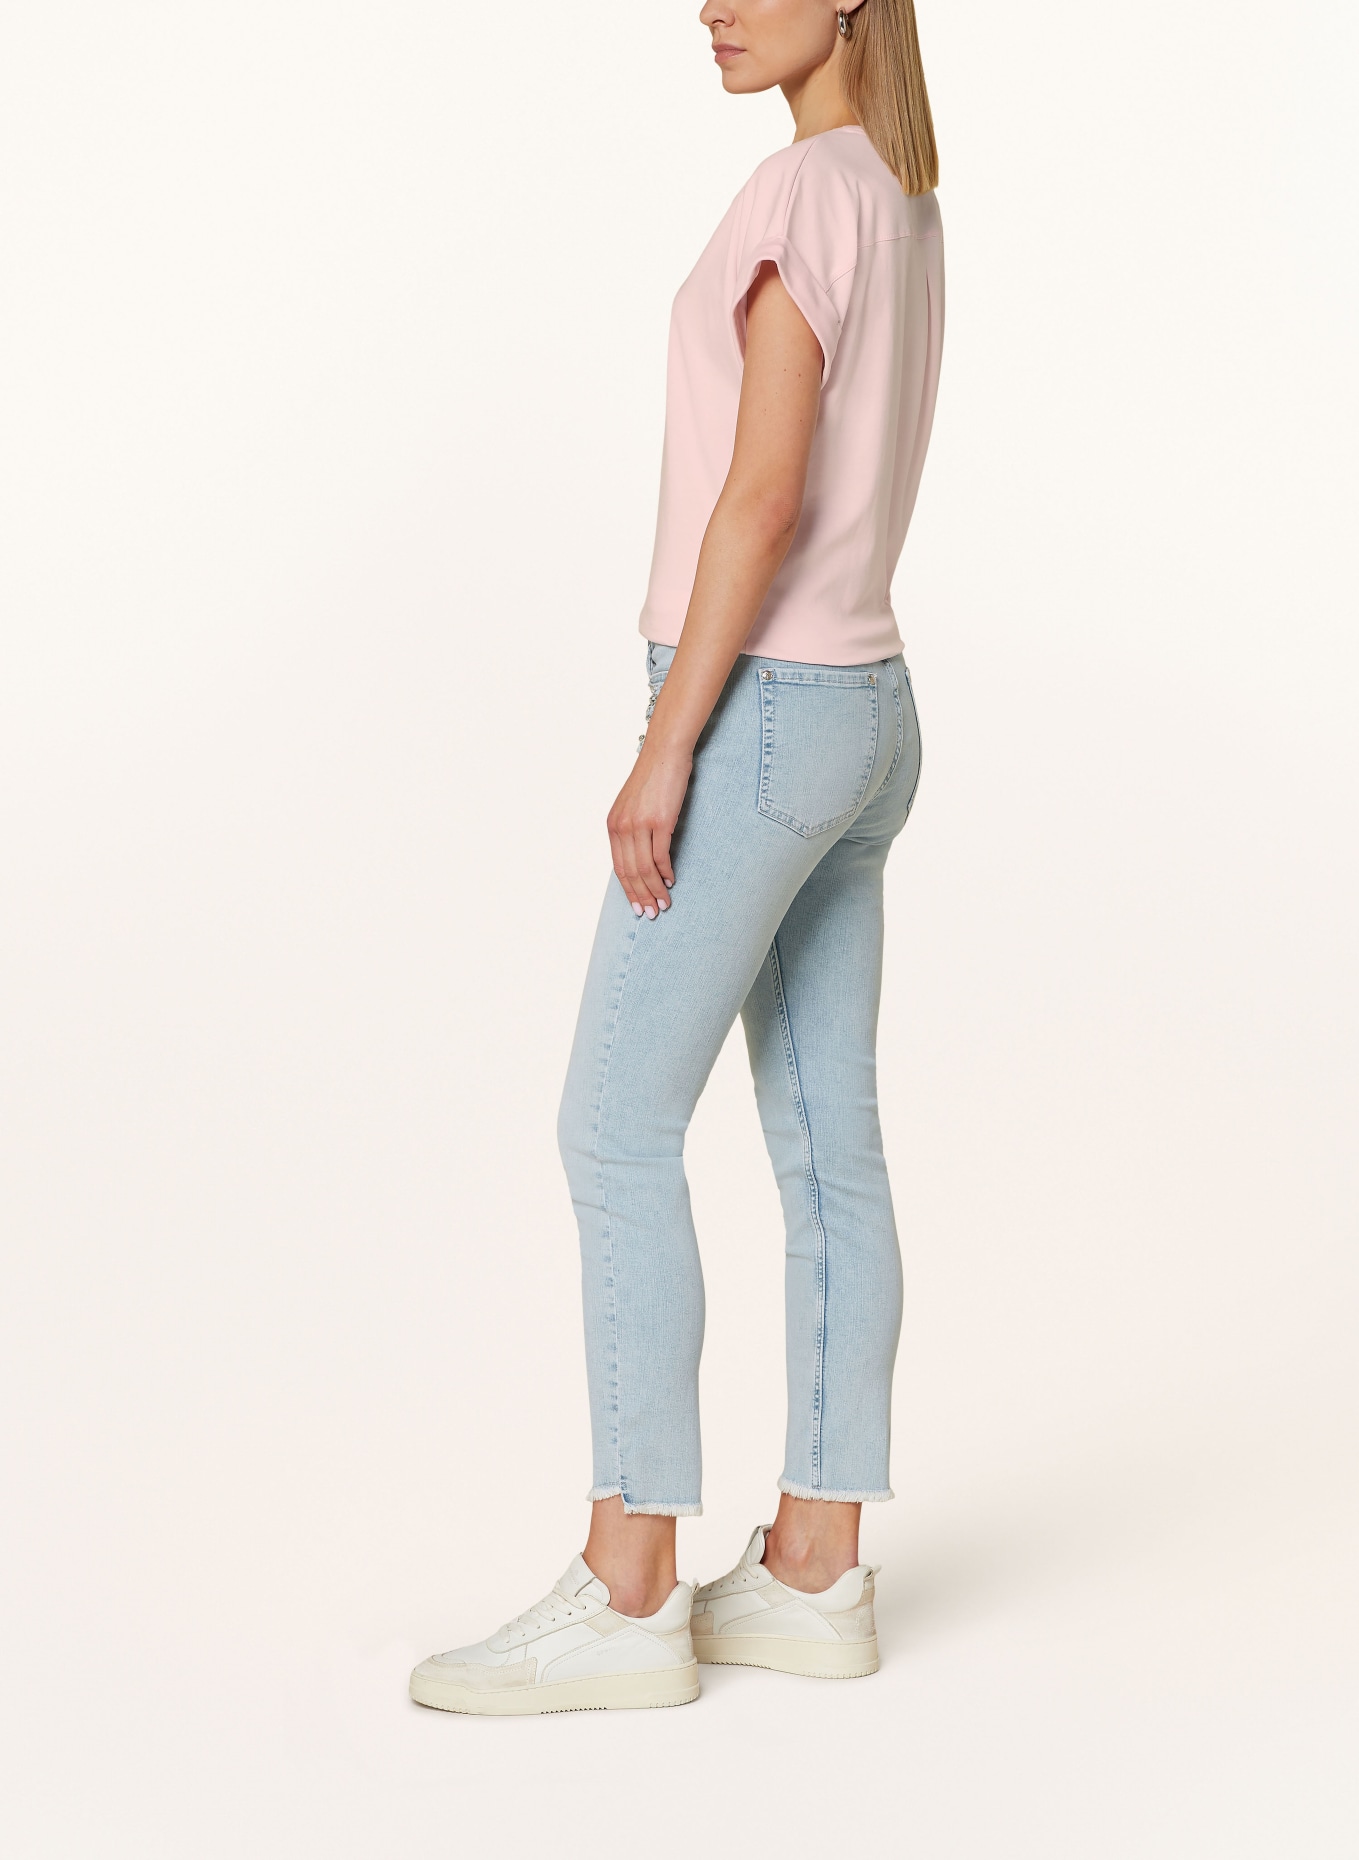 monari Skinny jeans with decorative gems, Color: 750 jeans (Image 4)